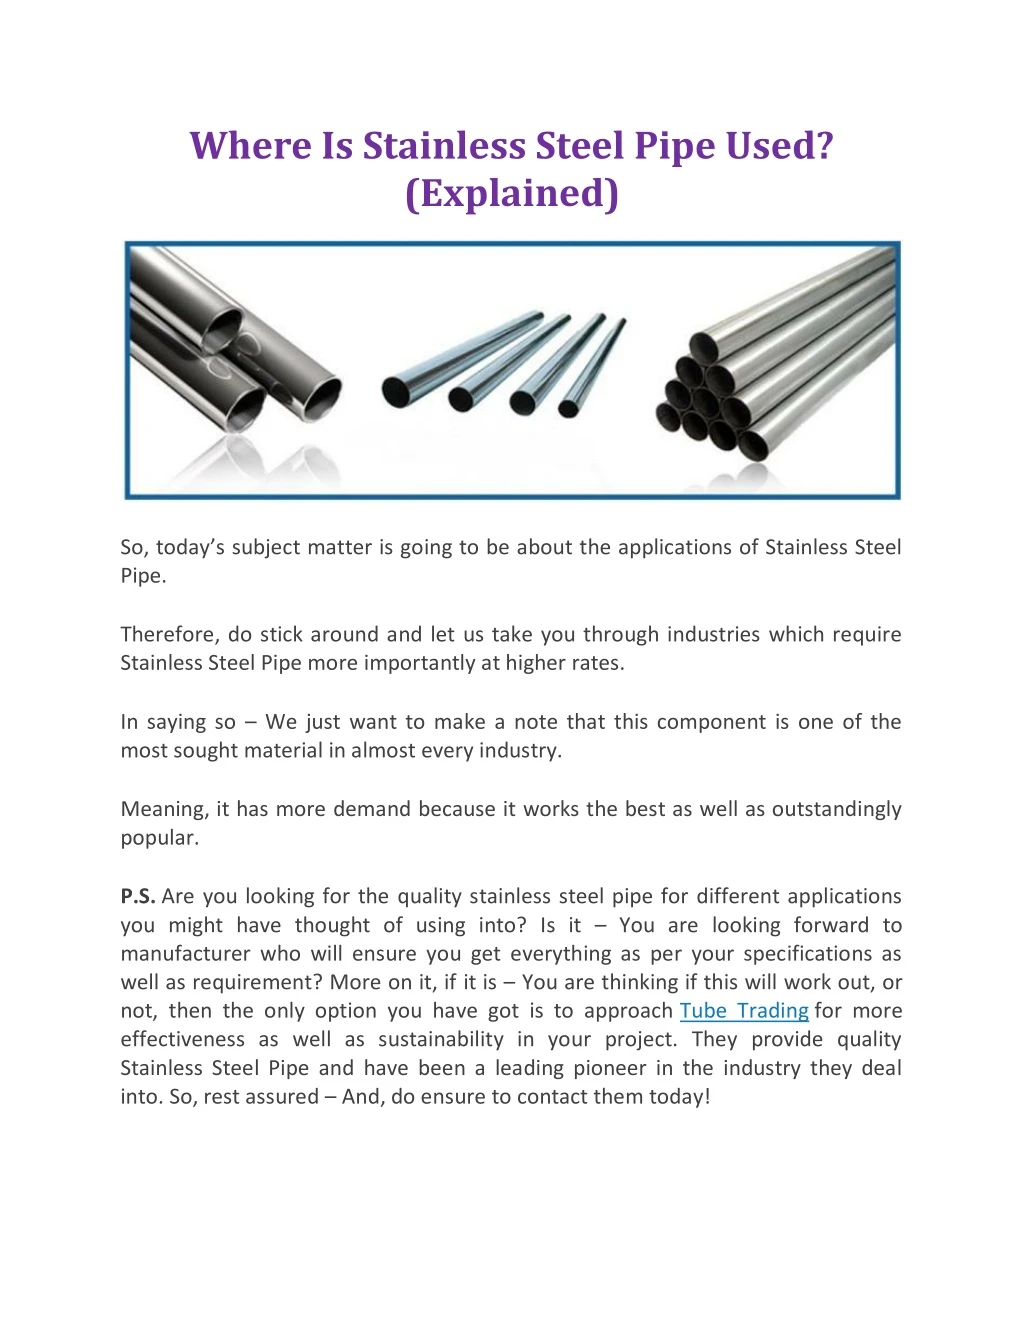 where is stainless steel pipe used explained